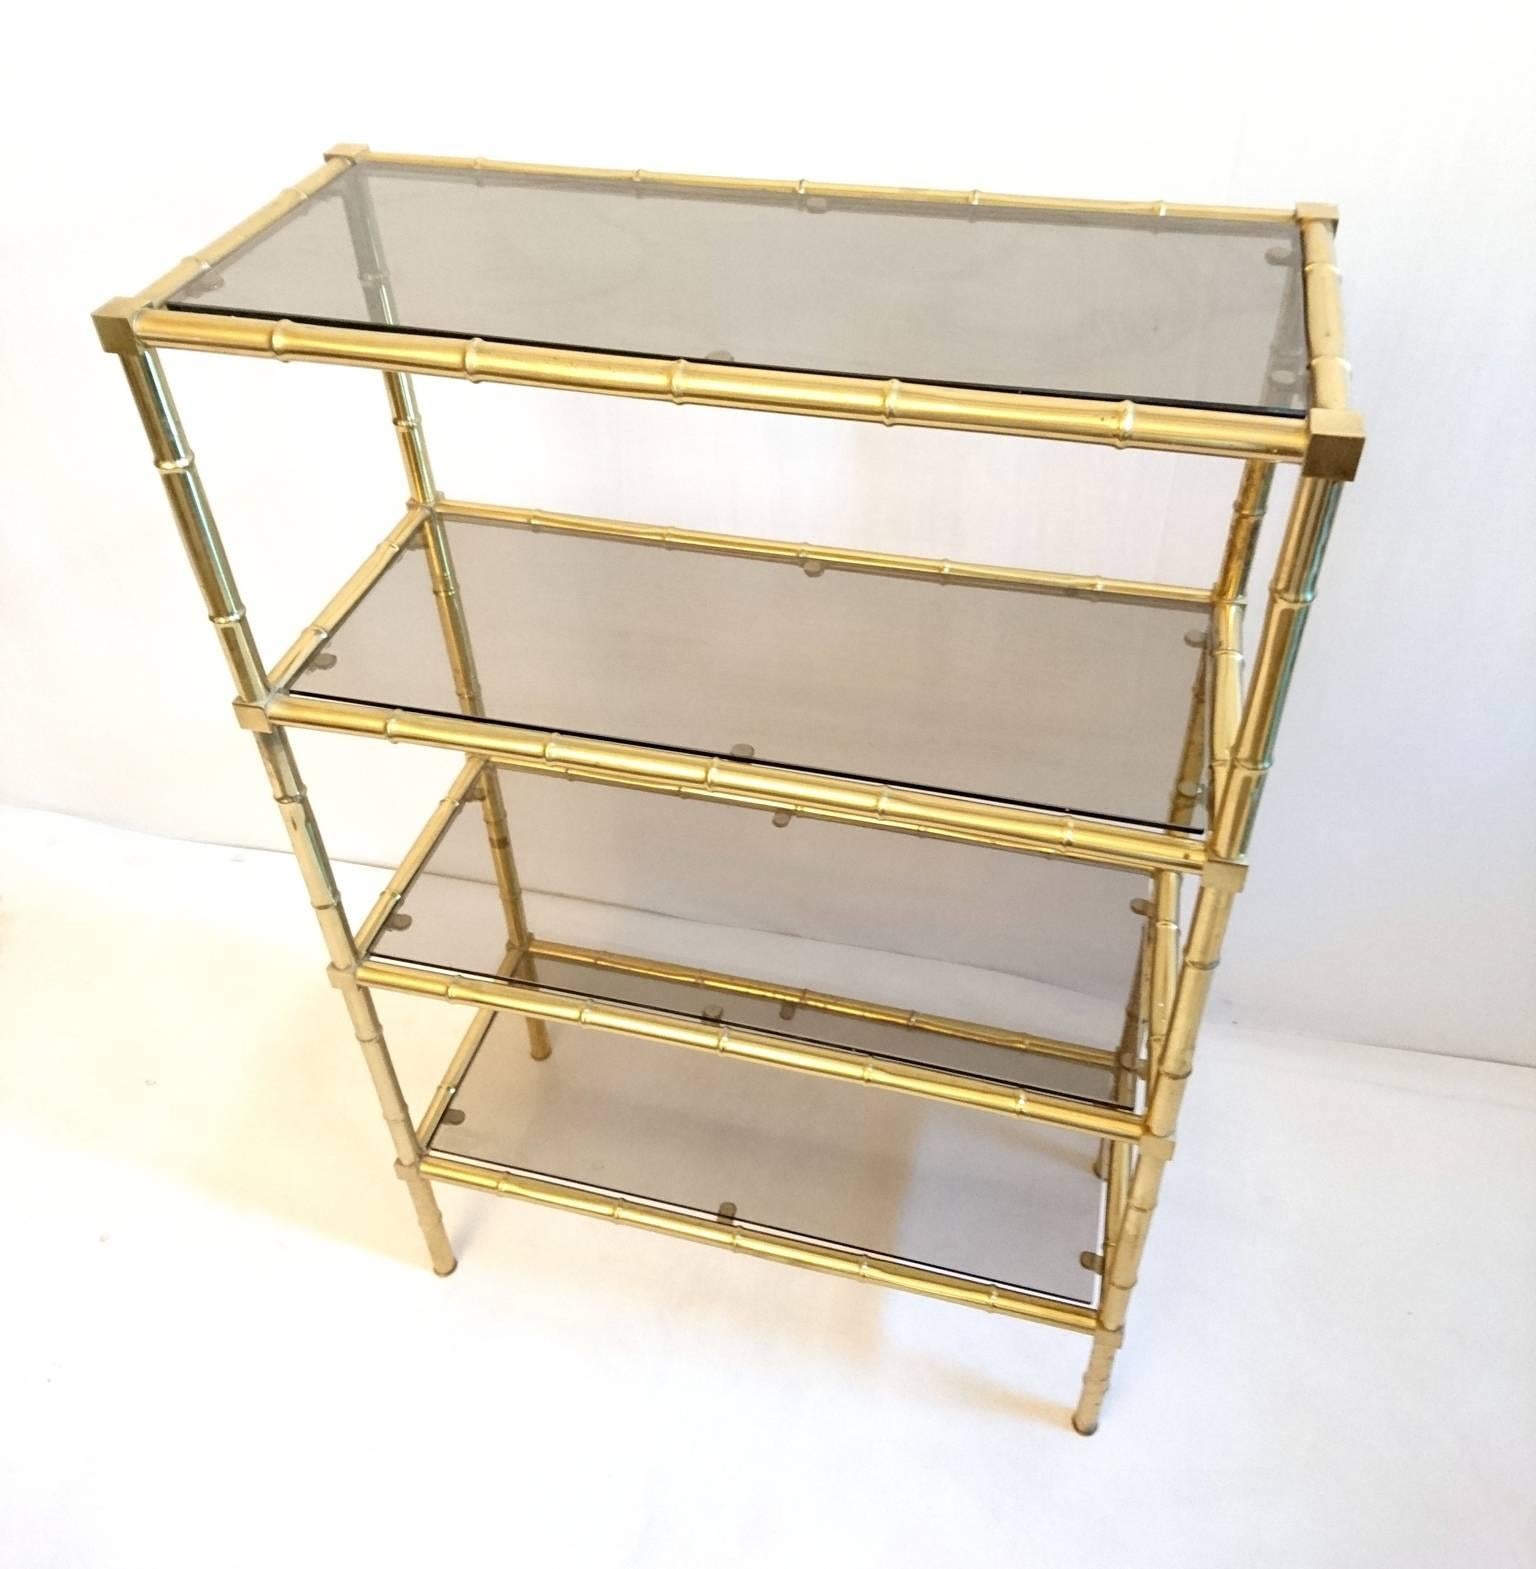 Four-tiered brass étagère/shelf in brass with smoke colored glass. Very stabile and solid.